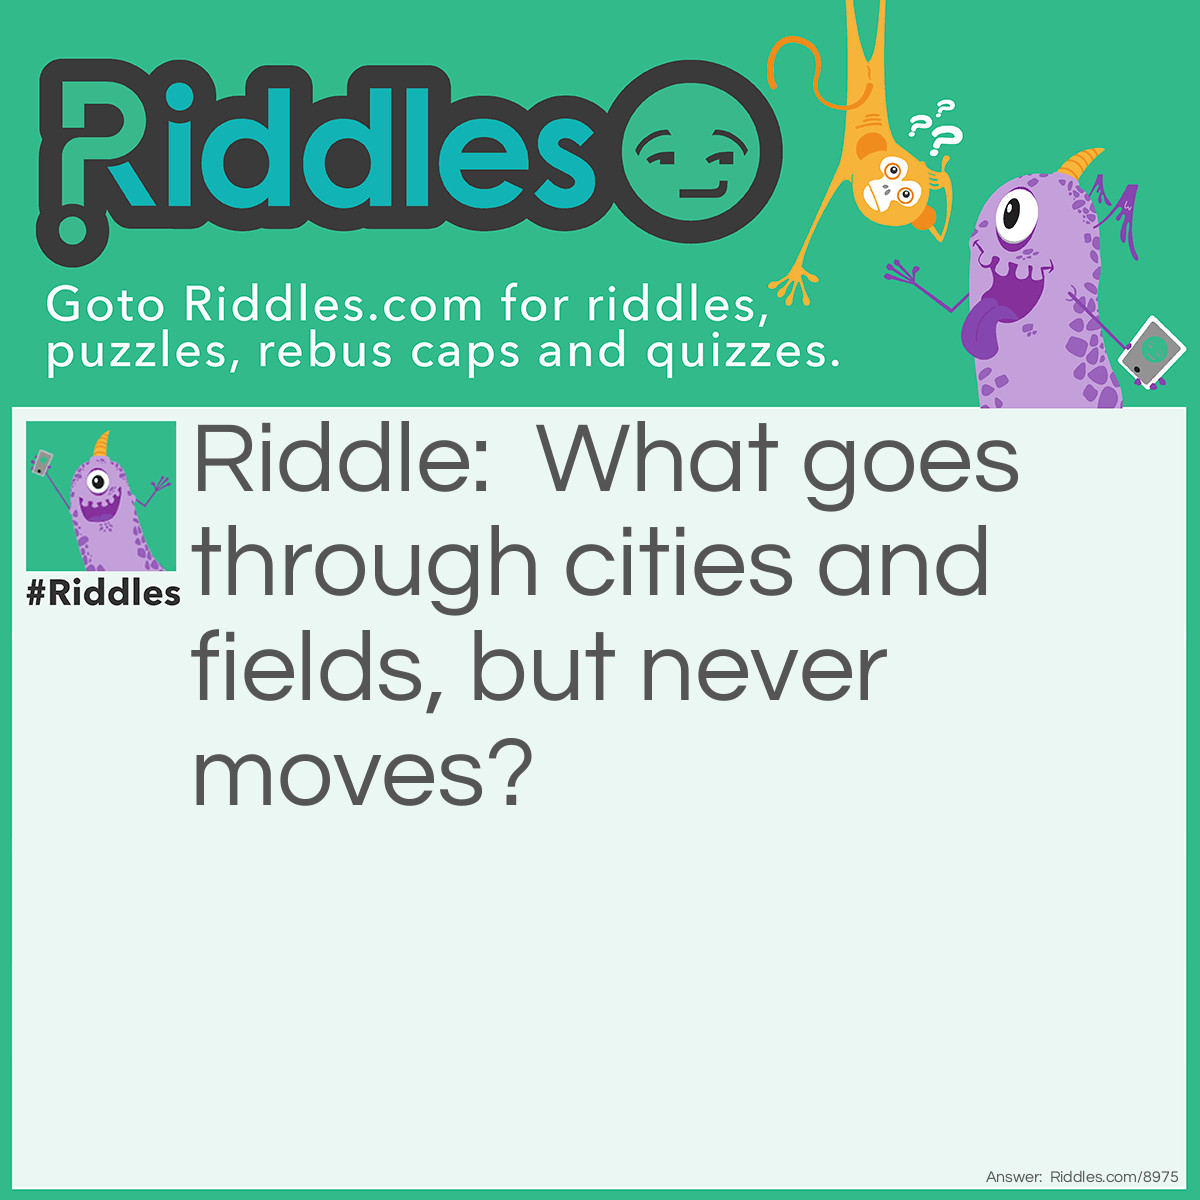 Riddle: What goes through cities and fields, but never moves? Answer: A road.